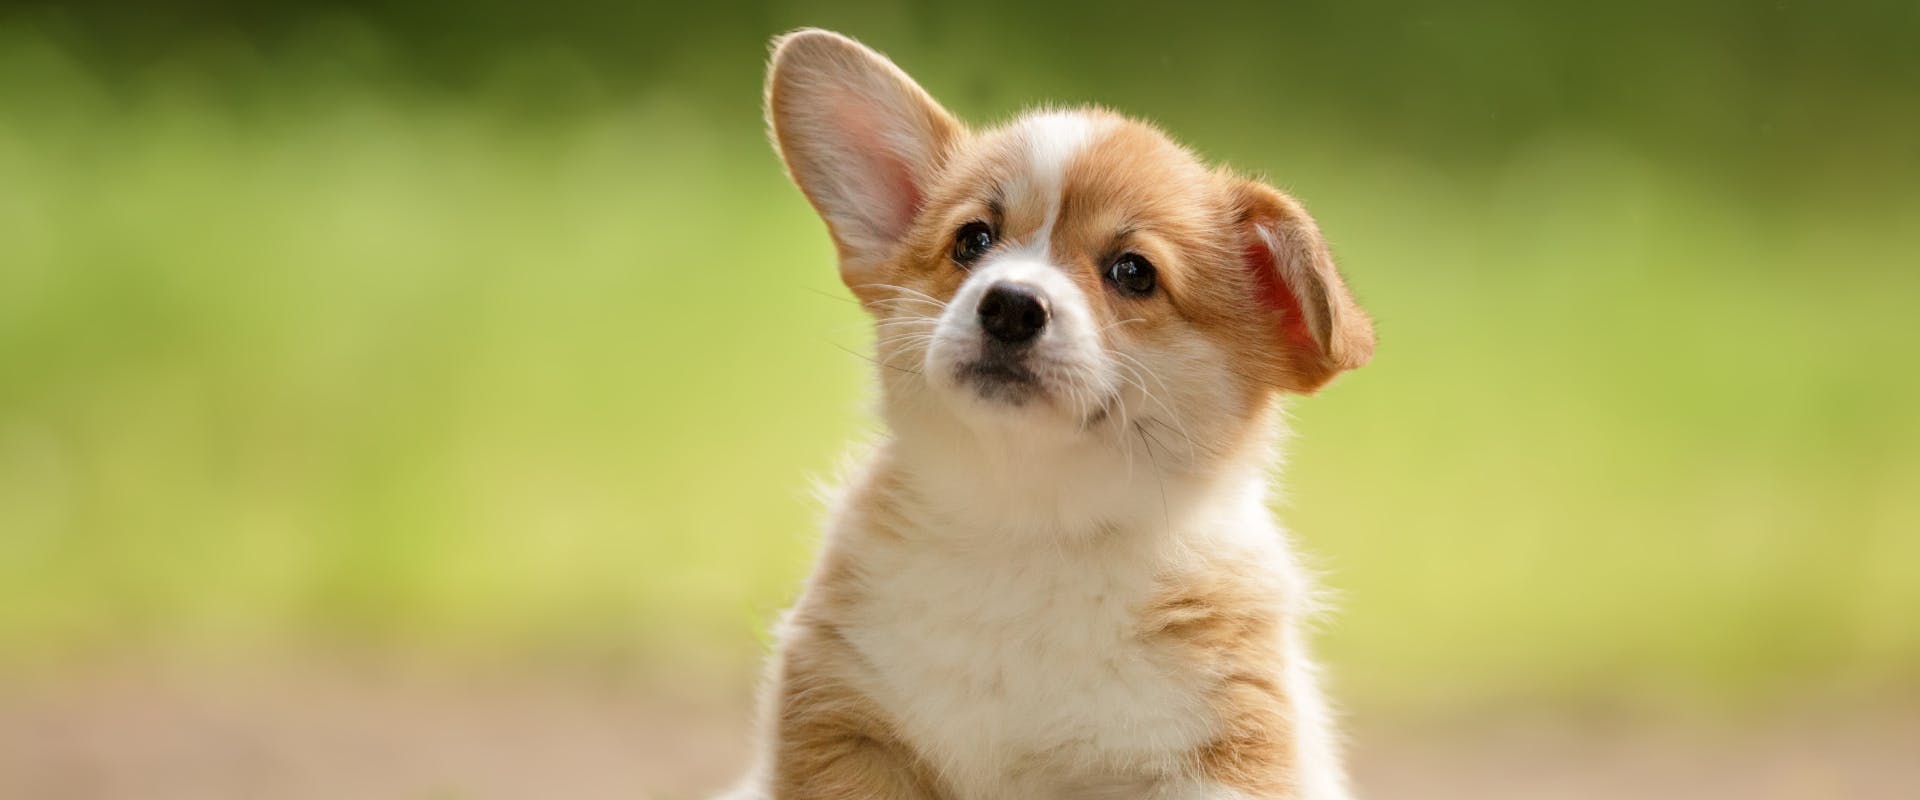 a corgi puppy sitting in a garden with one ear flopped down